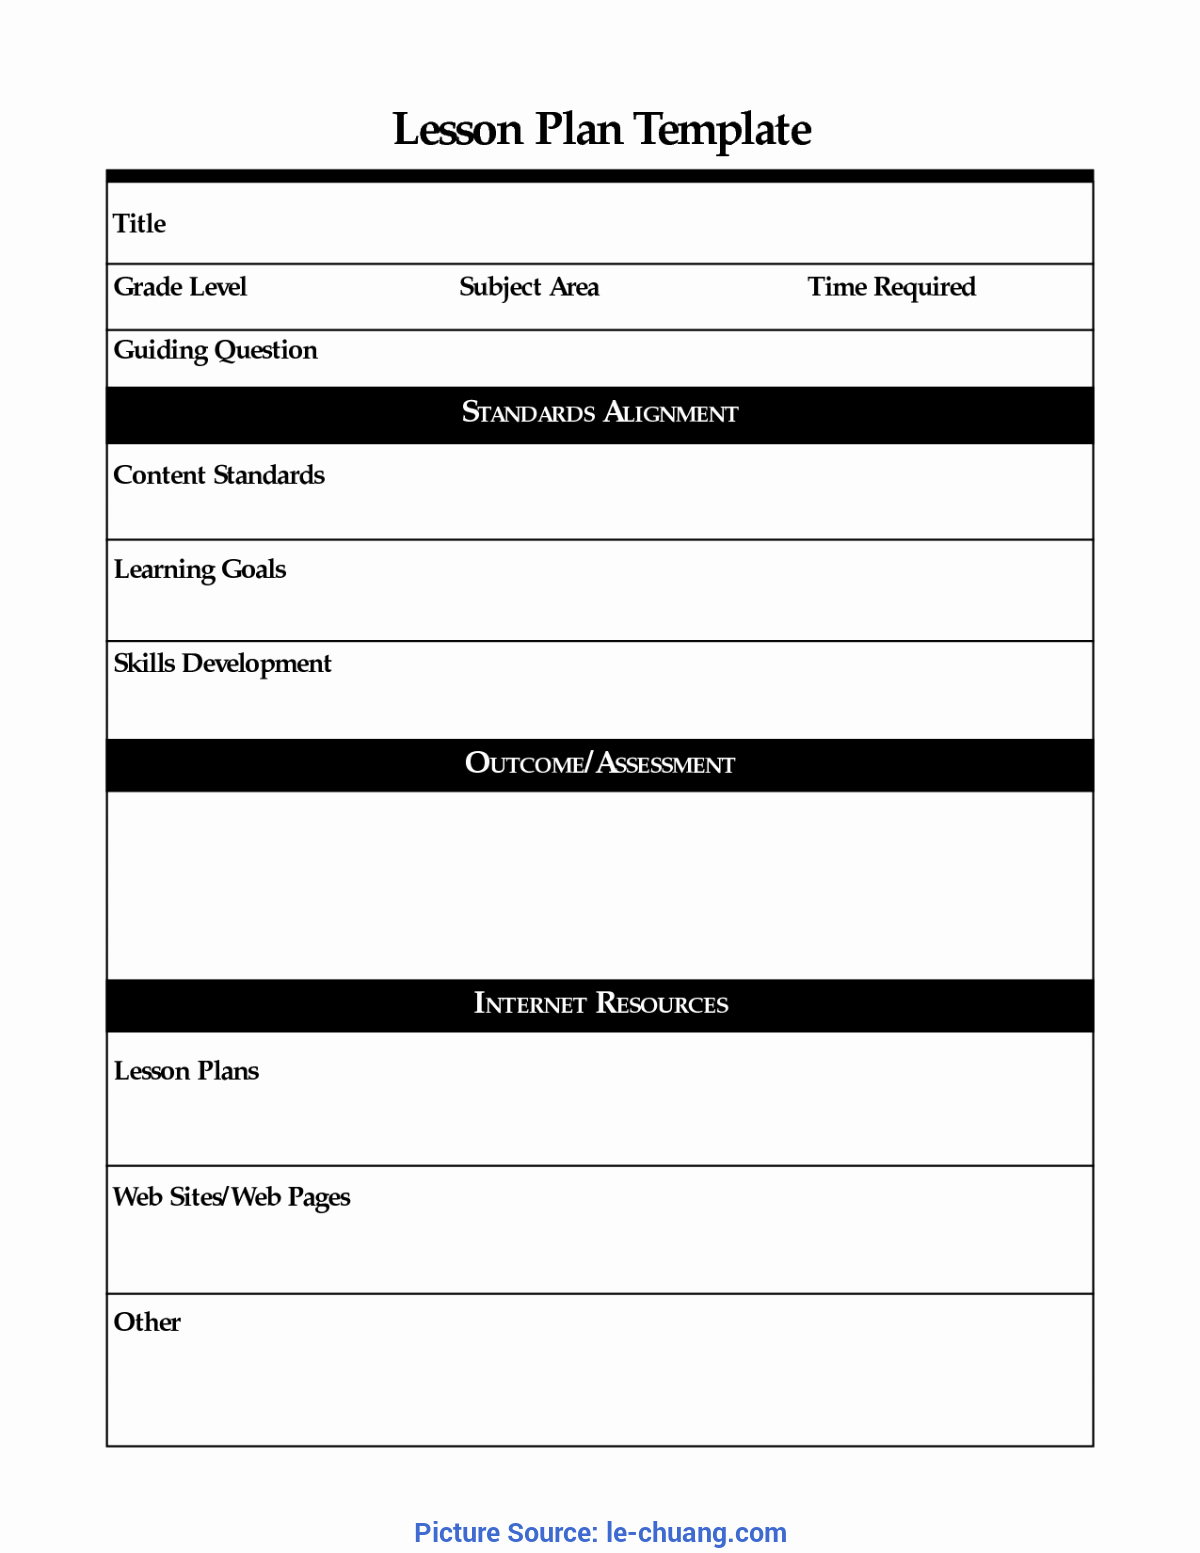 Wida Lesson Plan Template Awesome Briliant Traditional Lesson Plan Sample A Detailed Lesson